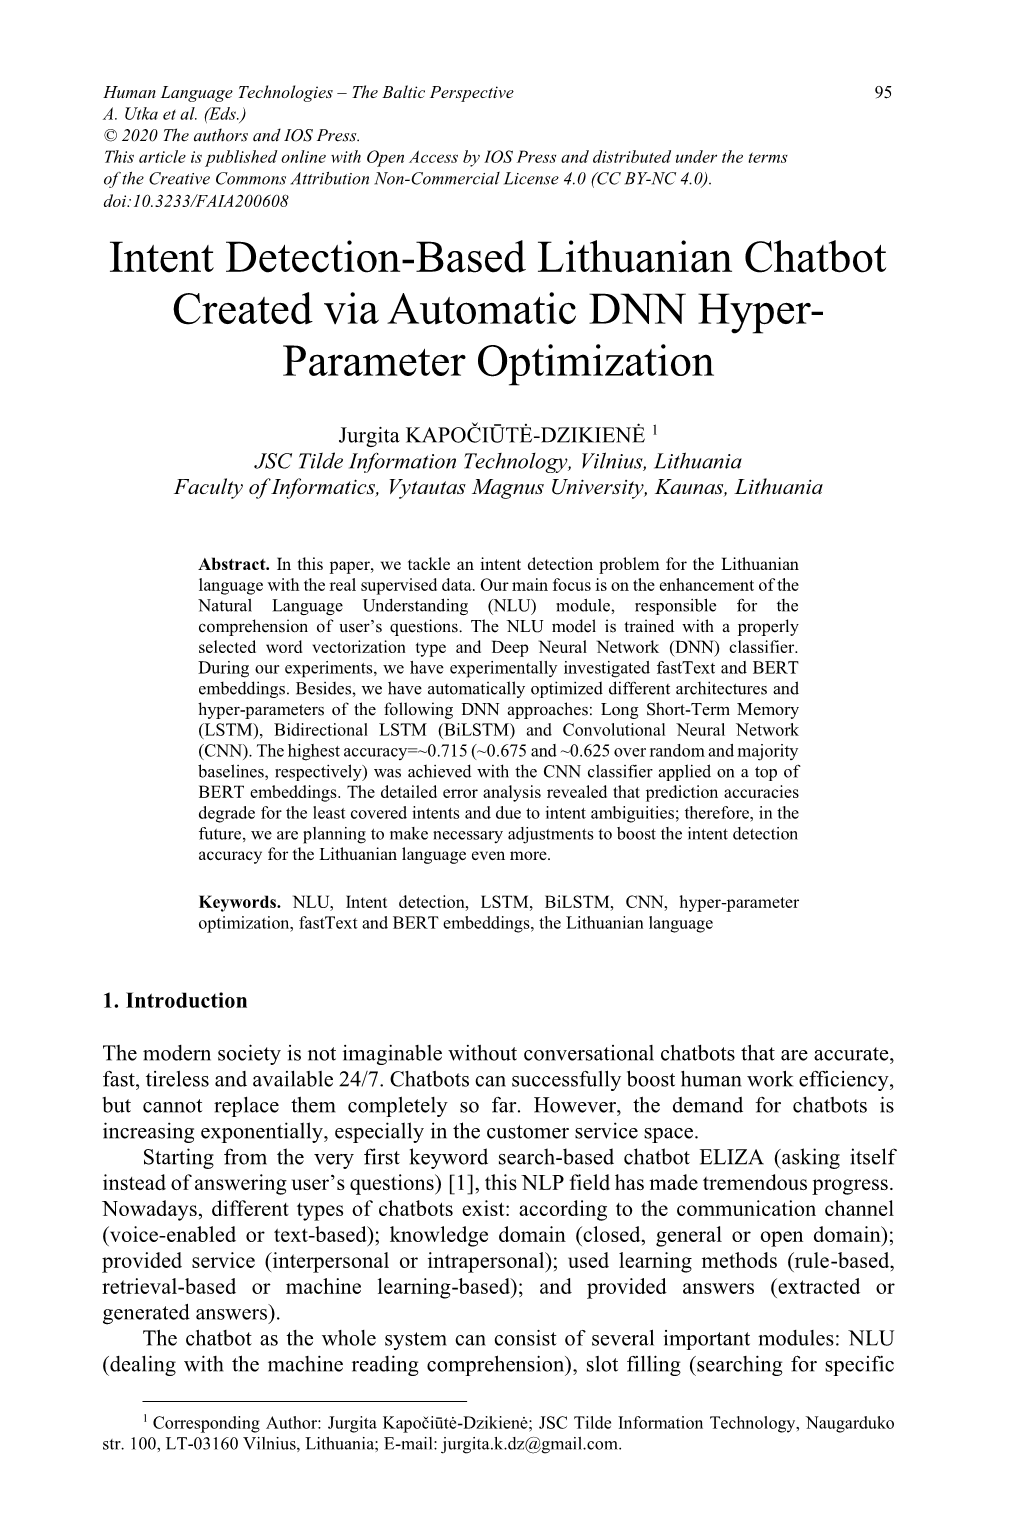 Intent Detection-Based Lithuanian Chatbot Created Via Automatic DNN Hyper- Parameter Optimization